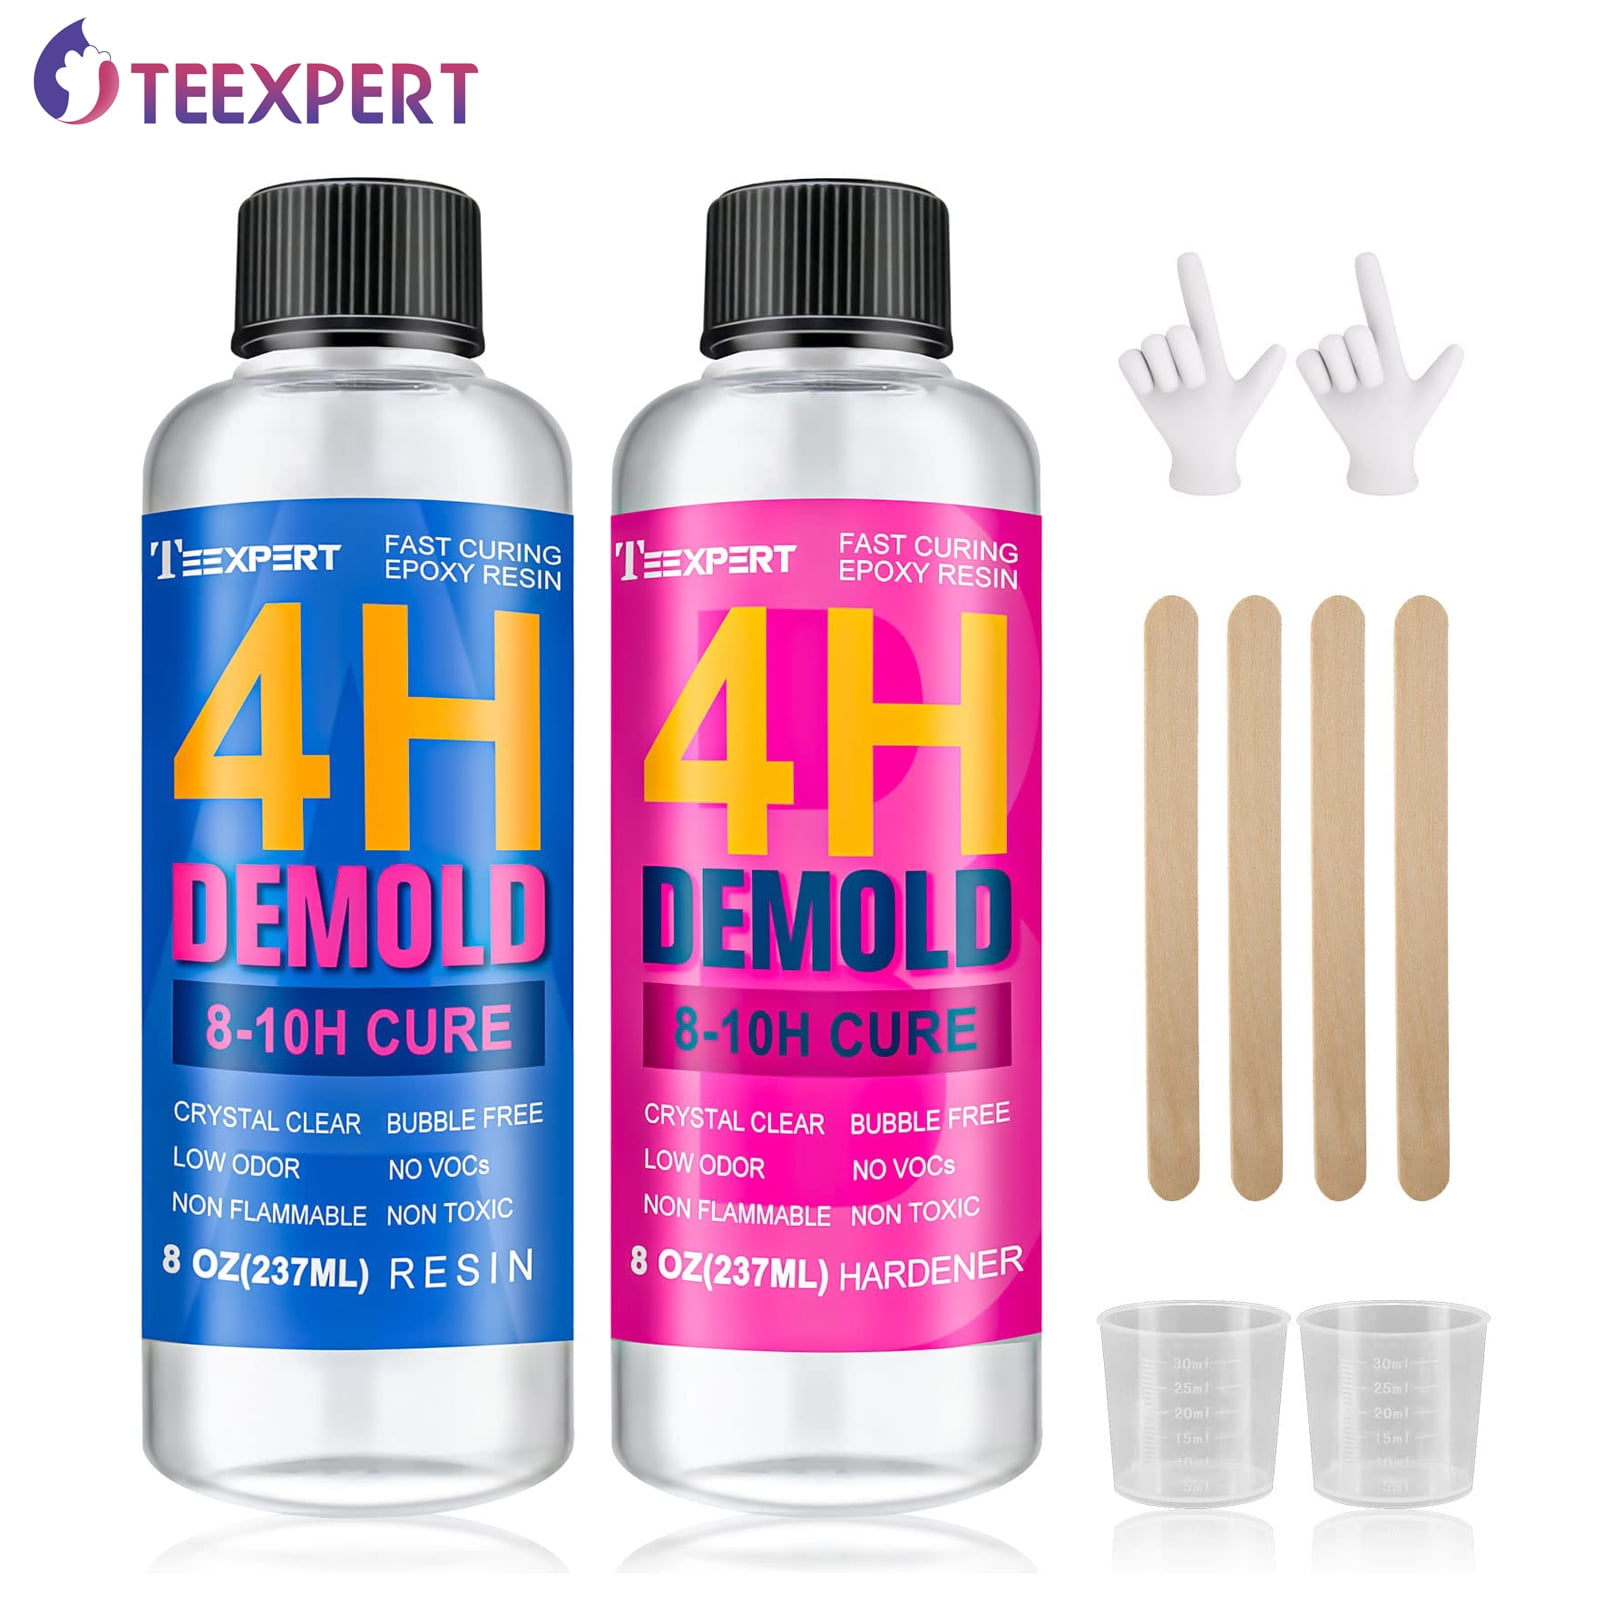  Fast Curing Epoxy Resin, 64OZ-4 Hours Demold Upgrade  Formula, Fast Curing And Bubble Free Epoxy Resin, Crystal Clear Epoxy Resin  Kit Self Leveling And Easy Mix For Art, Craft, Jewelry